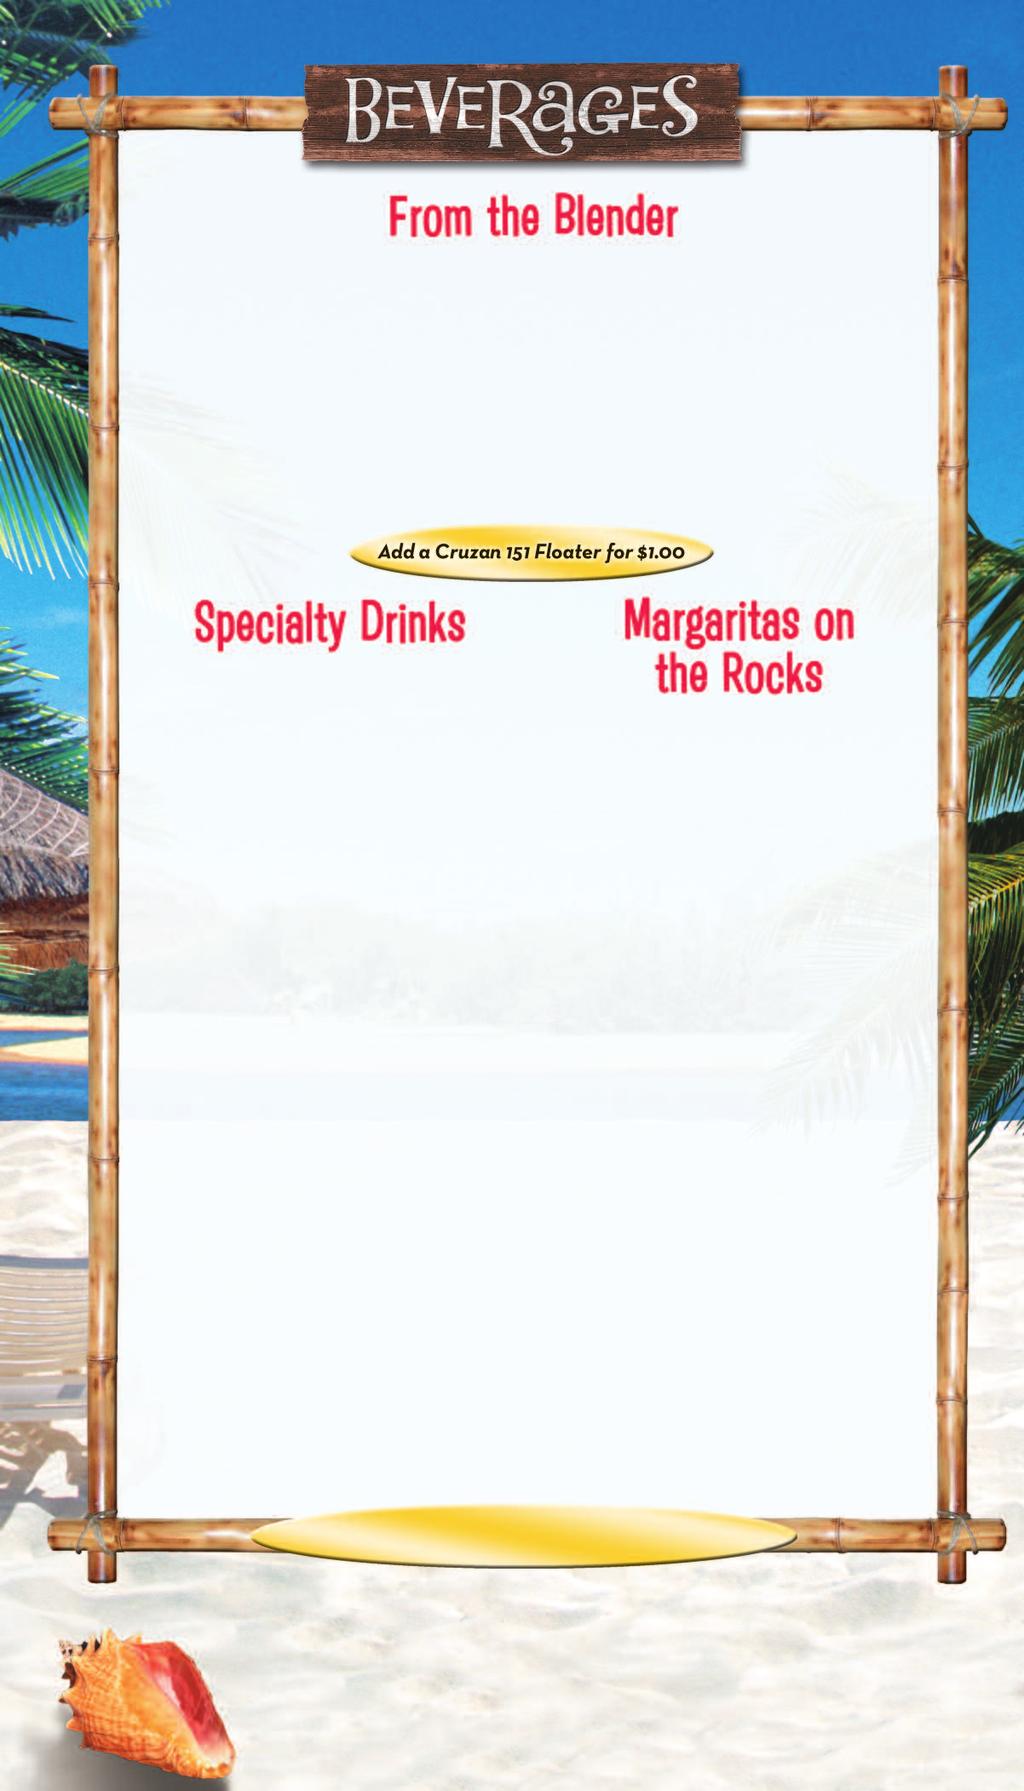 Cadillac Margarita A smooth, top shelf Margarita. Margaritaville Gold Tequila, Grand Marnier and our special Margarita Mix $9.00 Homeport Margarita (House) Lime, Strawberry or Mango $8.